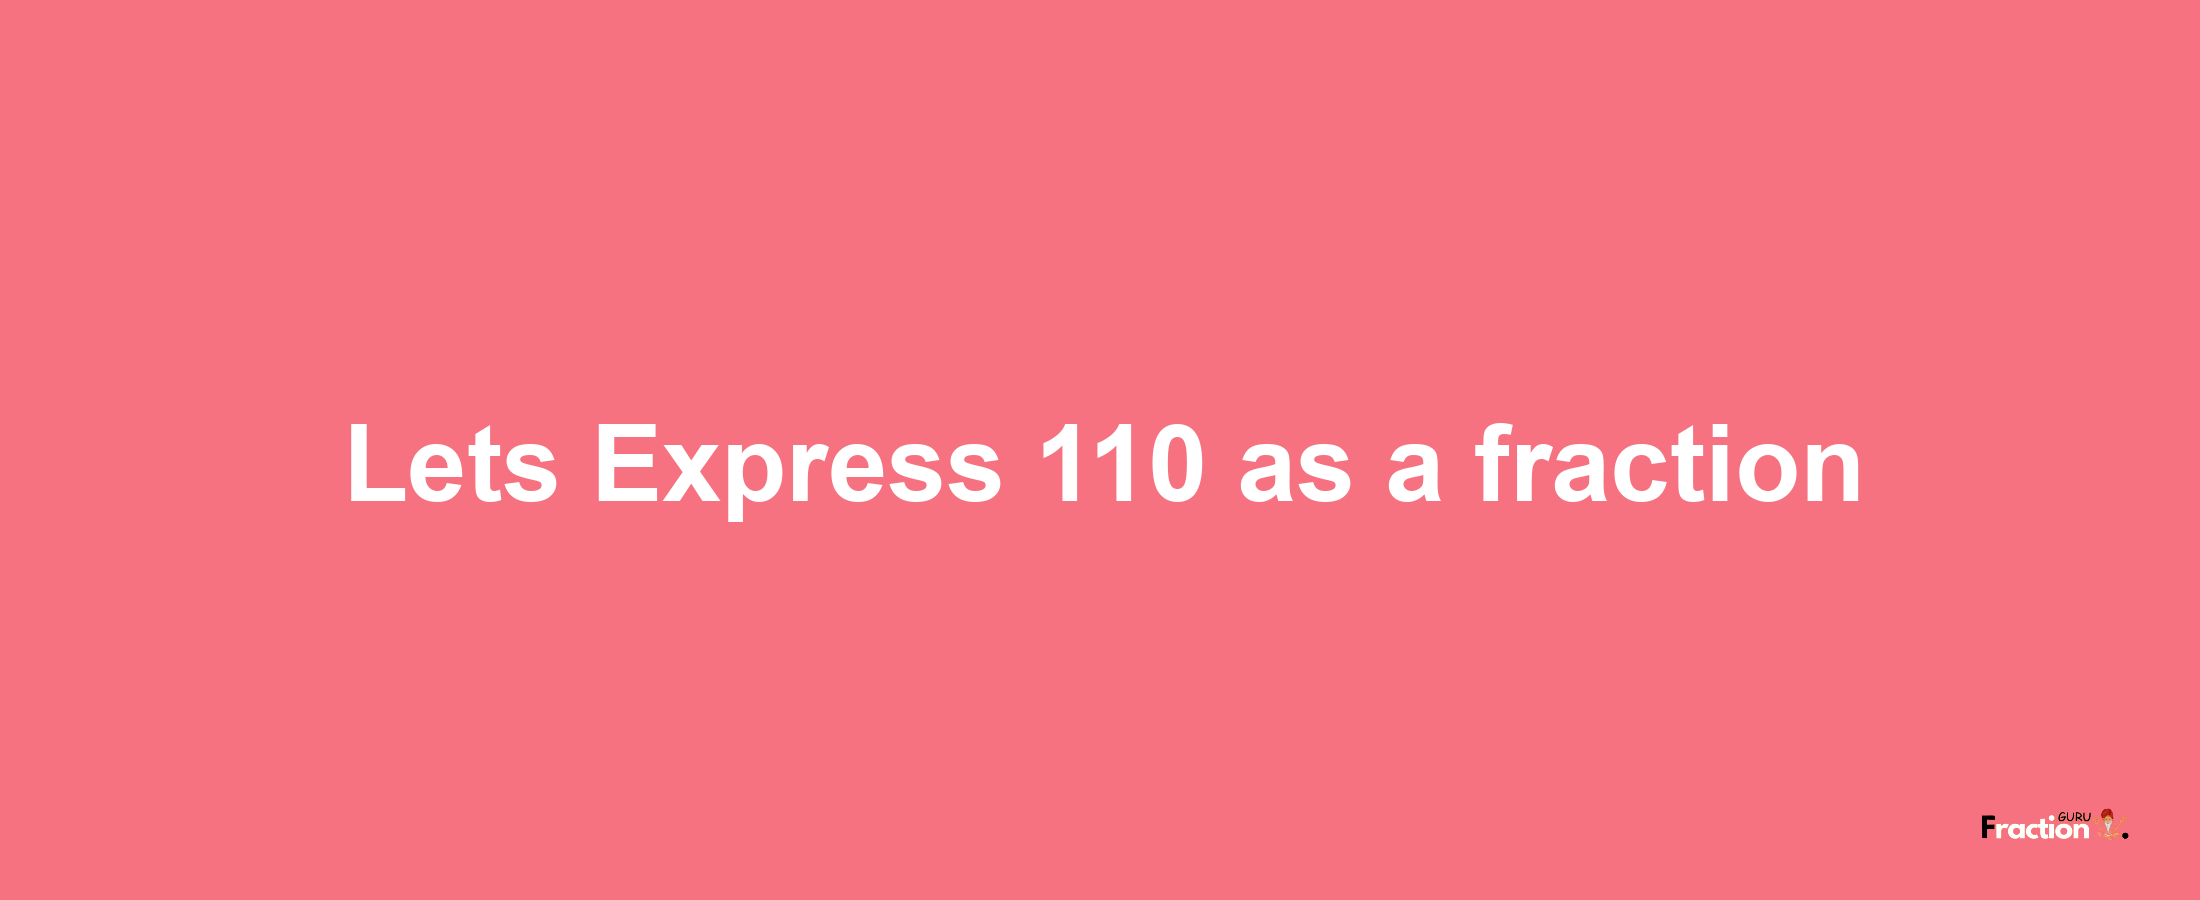 Lets Express 110 as afraction